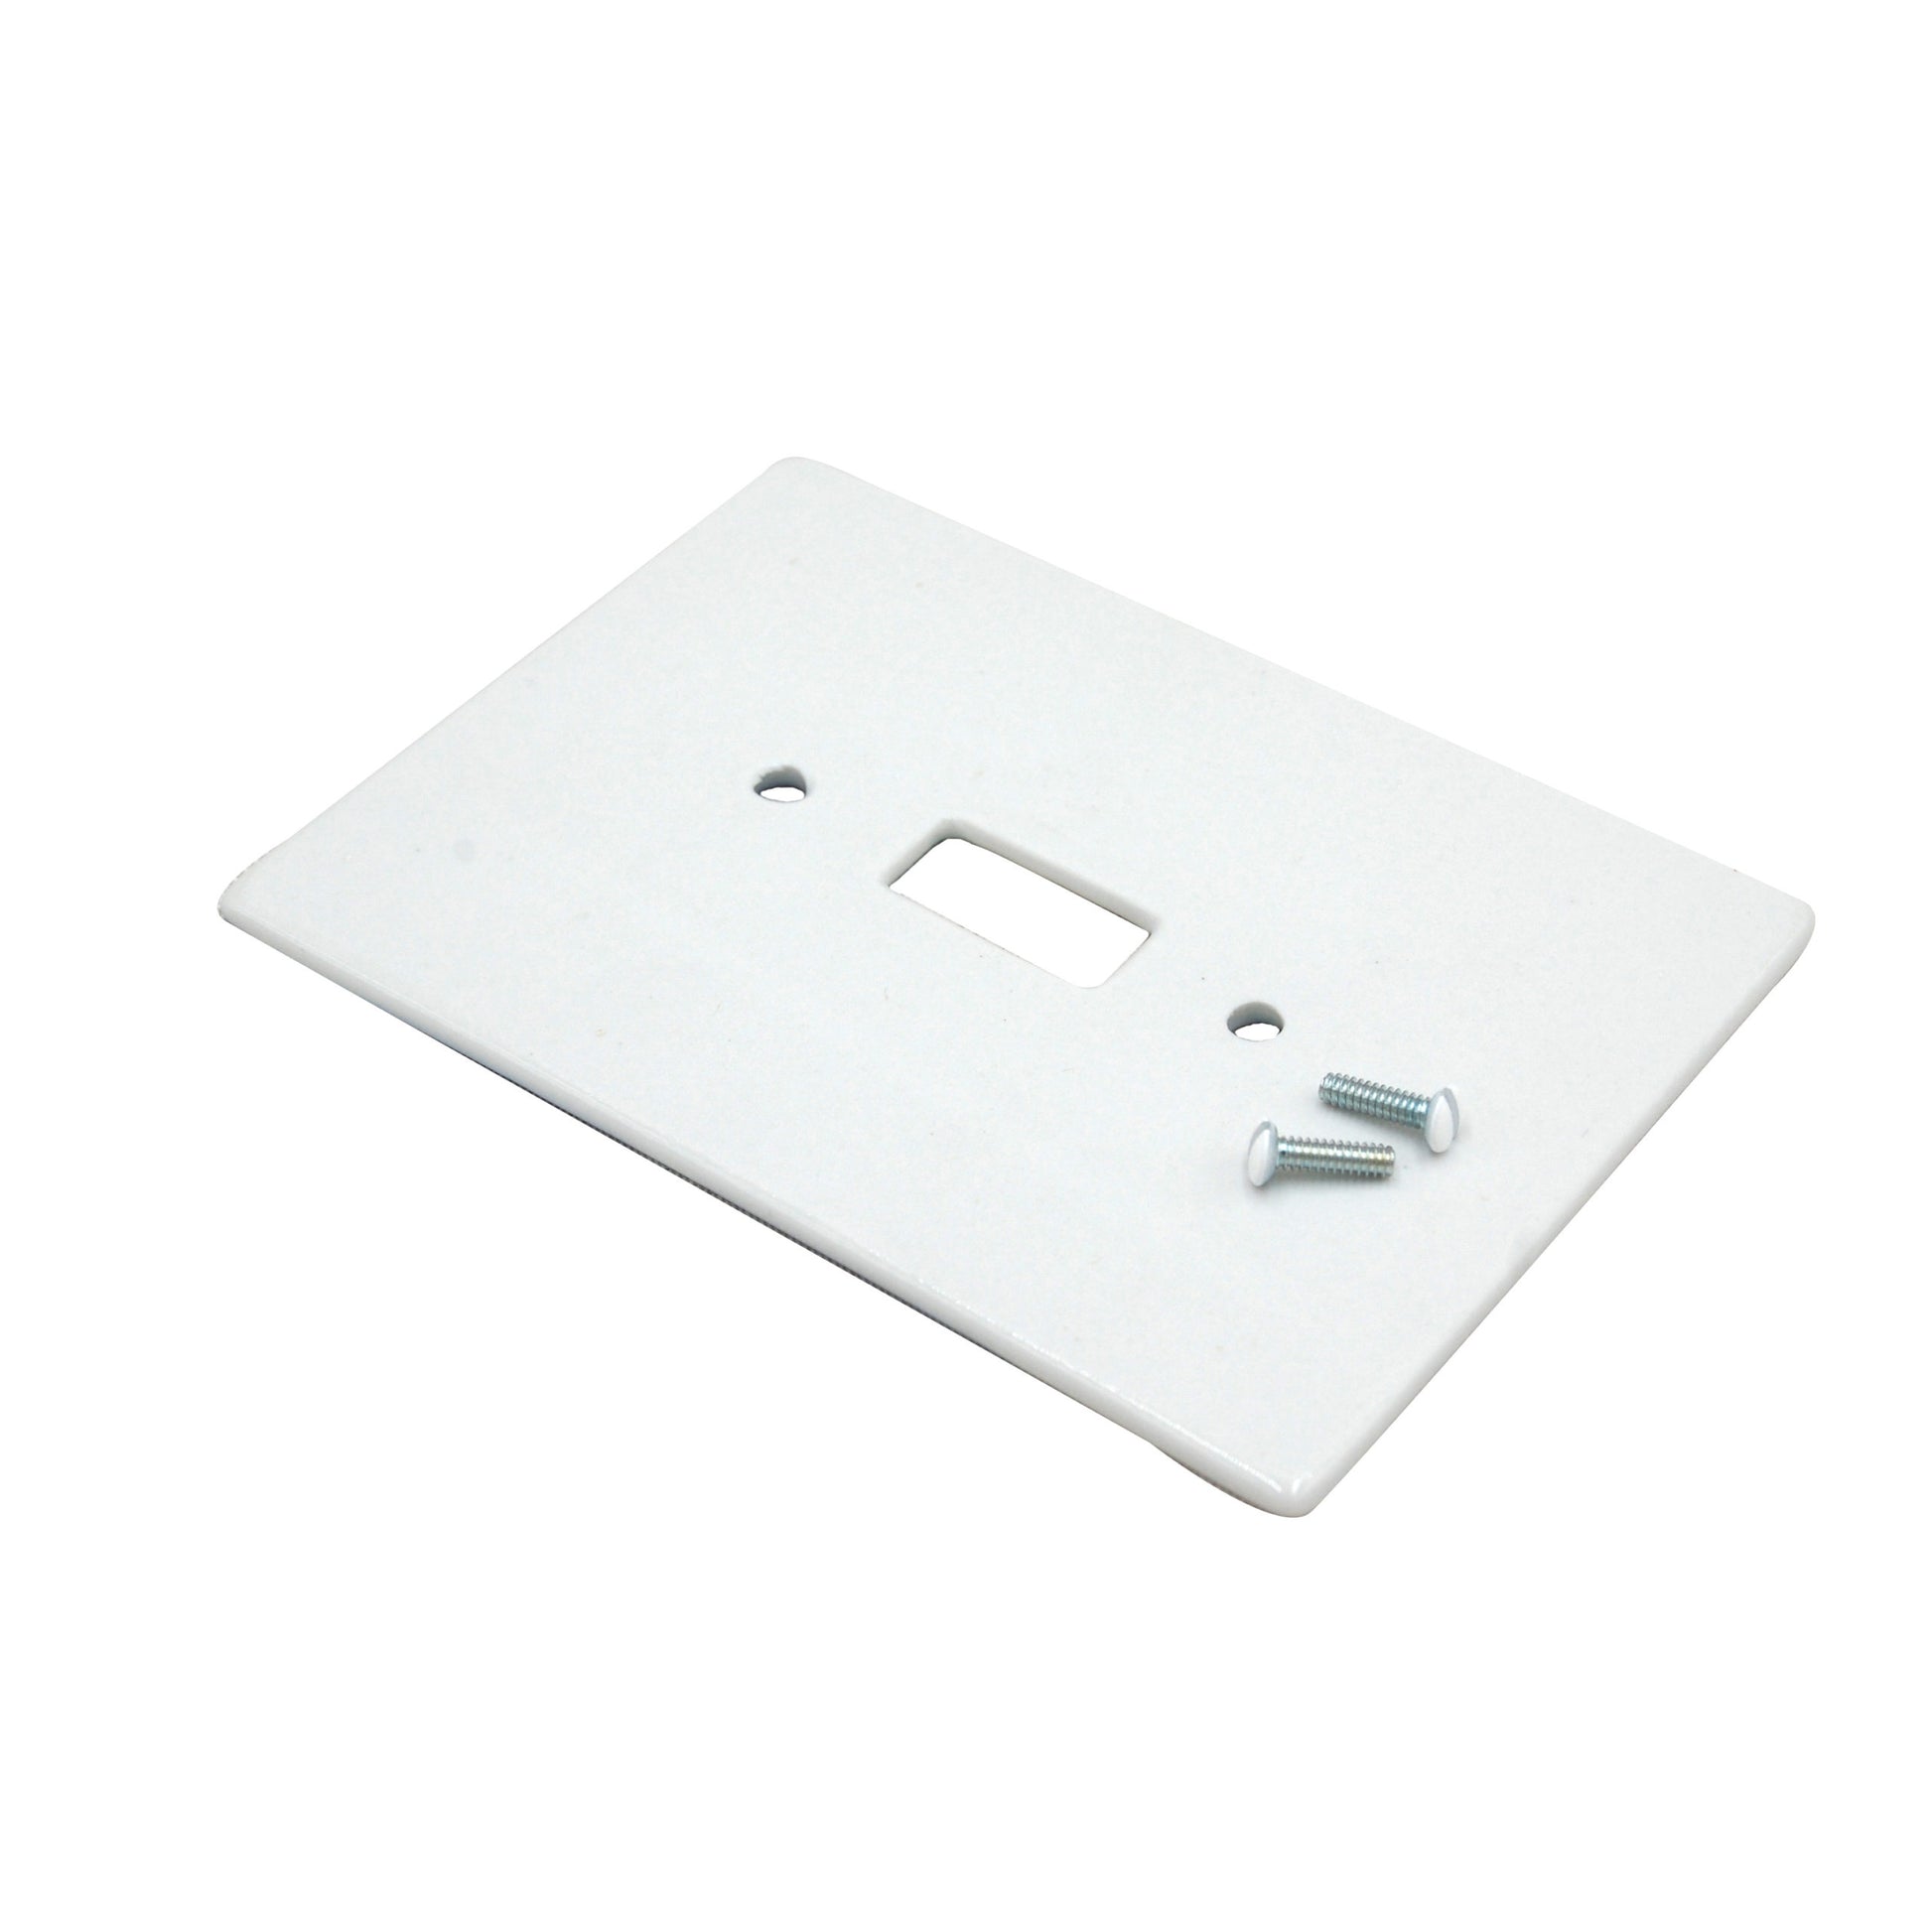 Plain single toggle switch plate with 2 white headed screws..